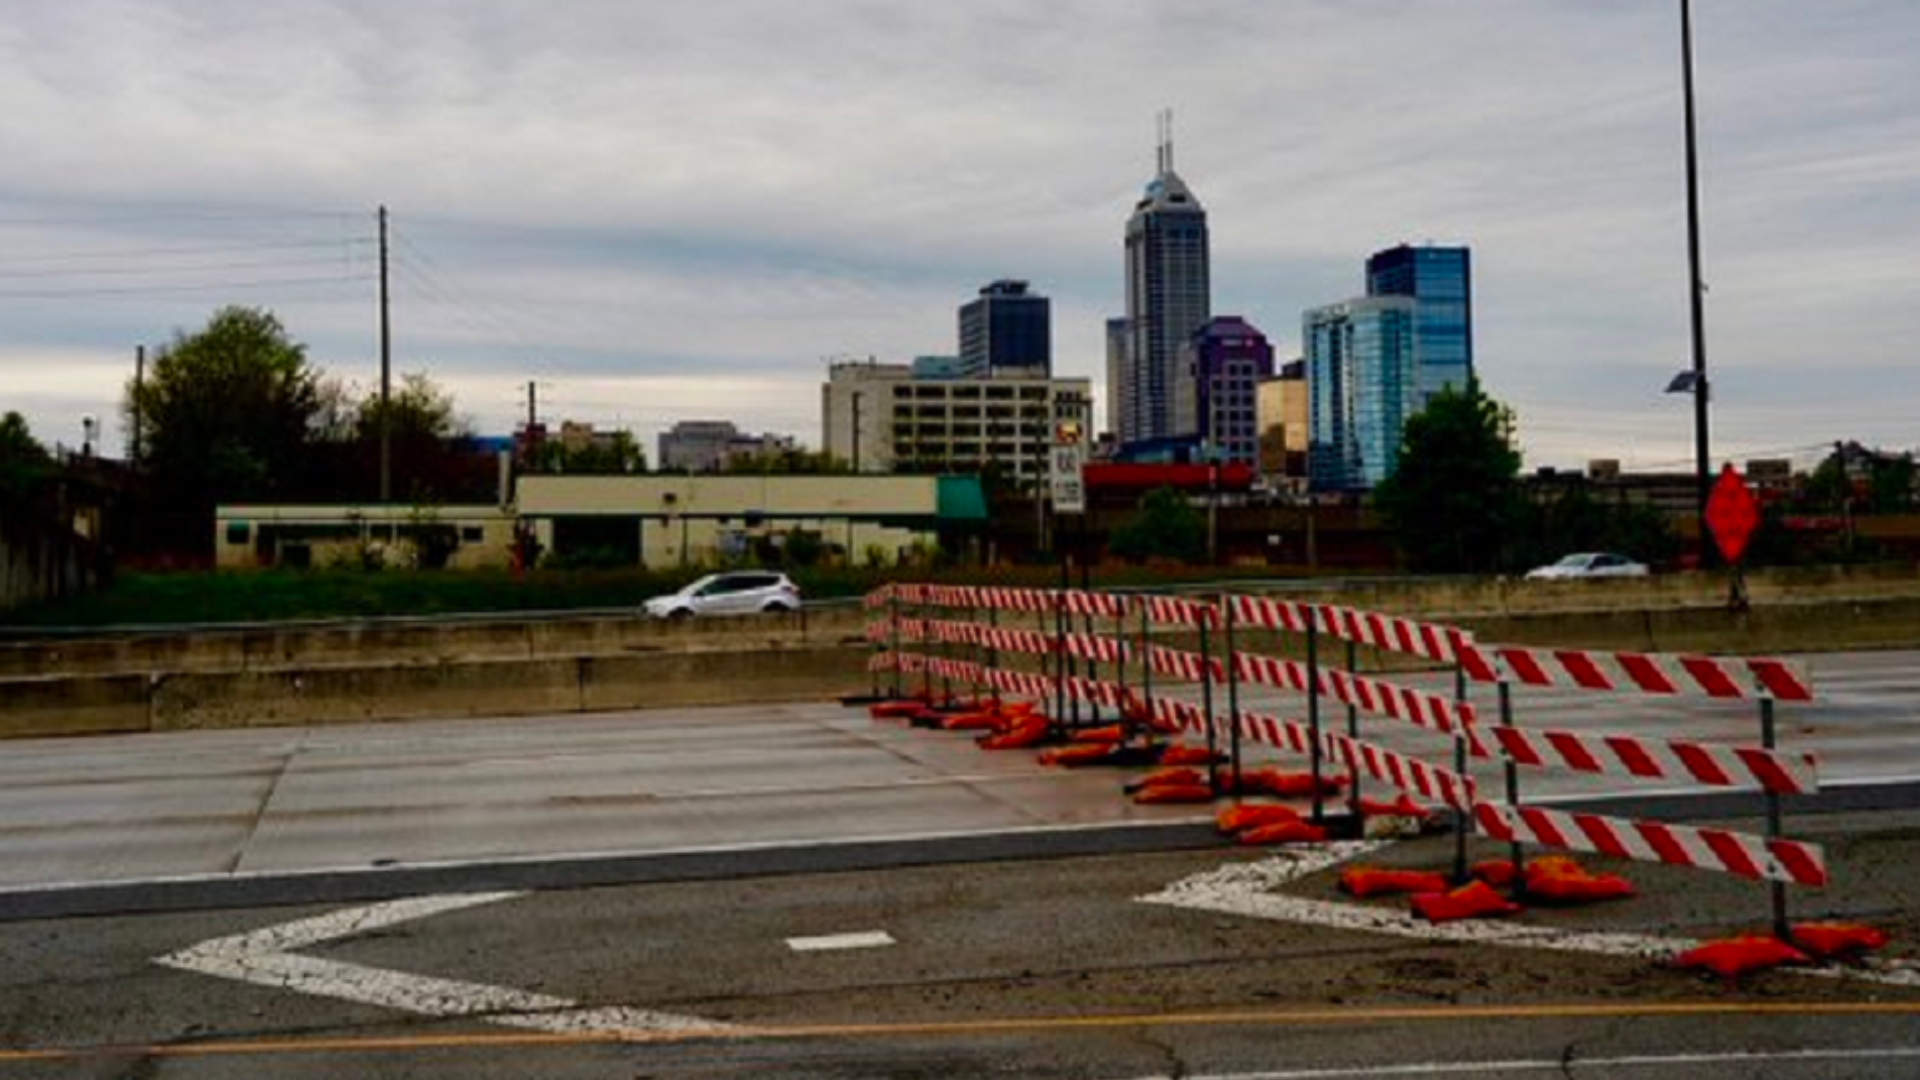 Saturday morning, the North Split Interstate interchange in downtown Indianapolis began the two-day closing process. More barricades were in place Sunday.